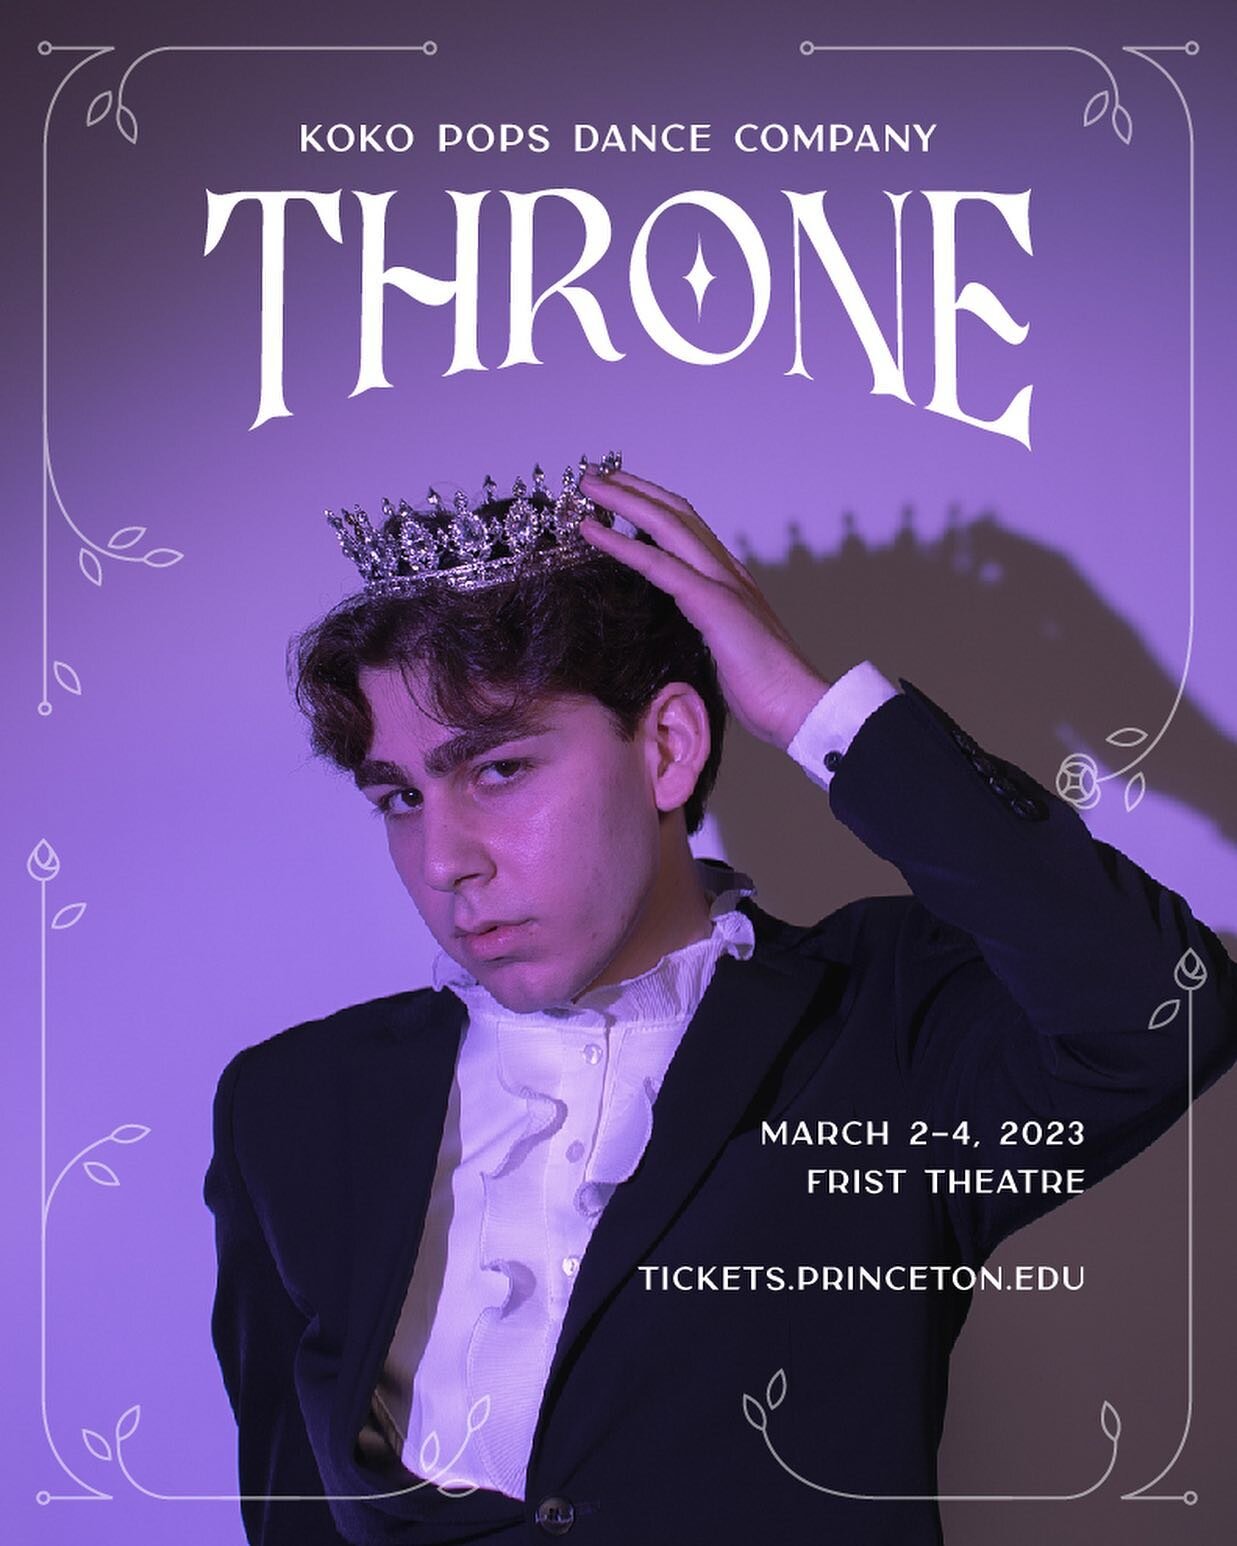 Closing night! We can&rsquo;t wait to perform for our two SOLD OUT crowds!! See you all tonight! 💜💜

KoKo Pops presents: THRONE

Photography by @tiff._.tsai @jessicaa.dong
Design by @briantieu @clairebear_1004 @paige.min @zhu.anlon